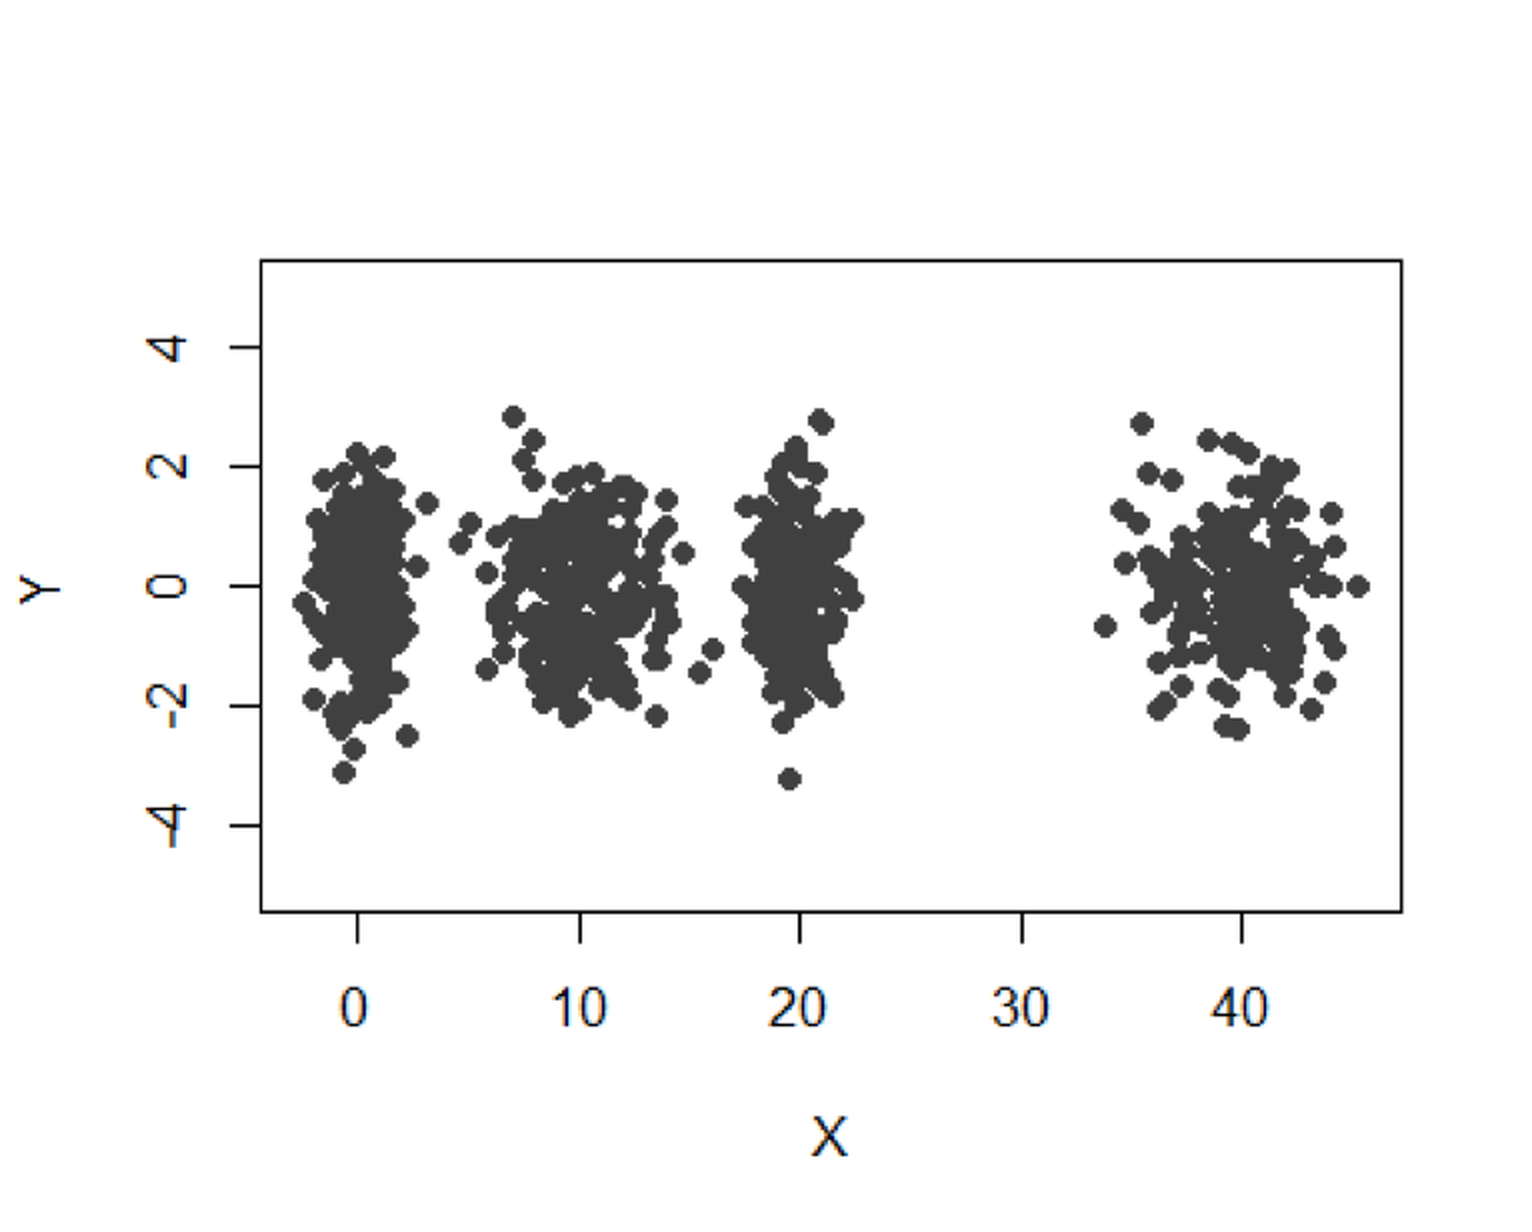 A mixture of $4$ Gaussian distributions